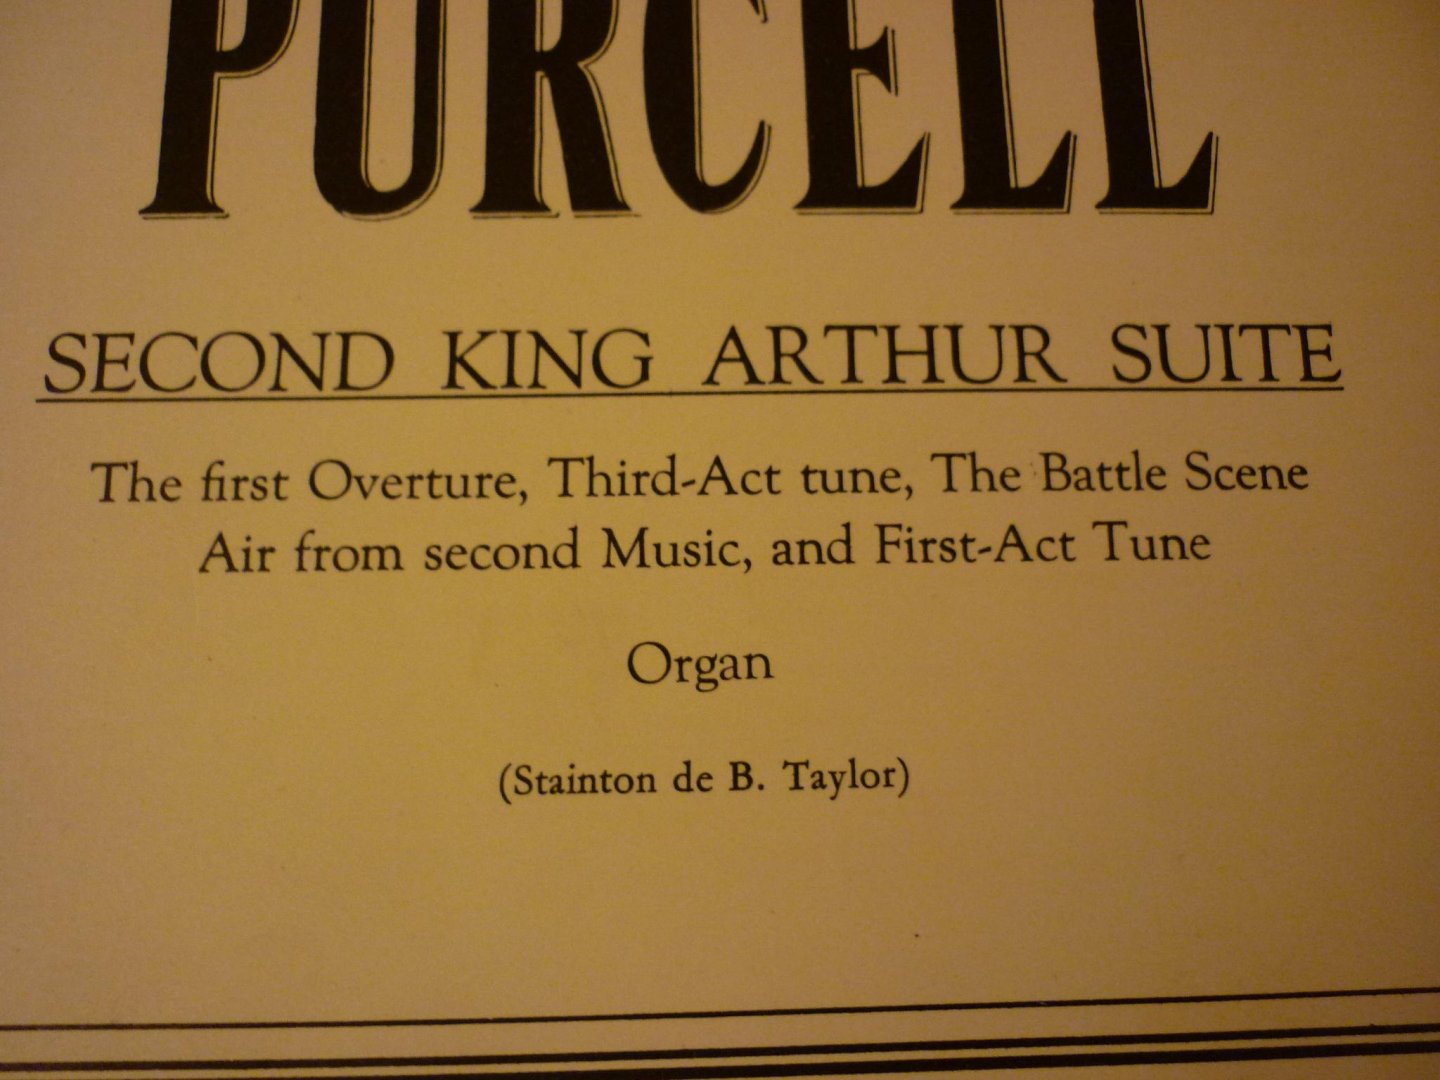 Purcell; Henry  (1659-1695) - The first overture to "King Arthur"- Organ (Stainton de B. Taylor)